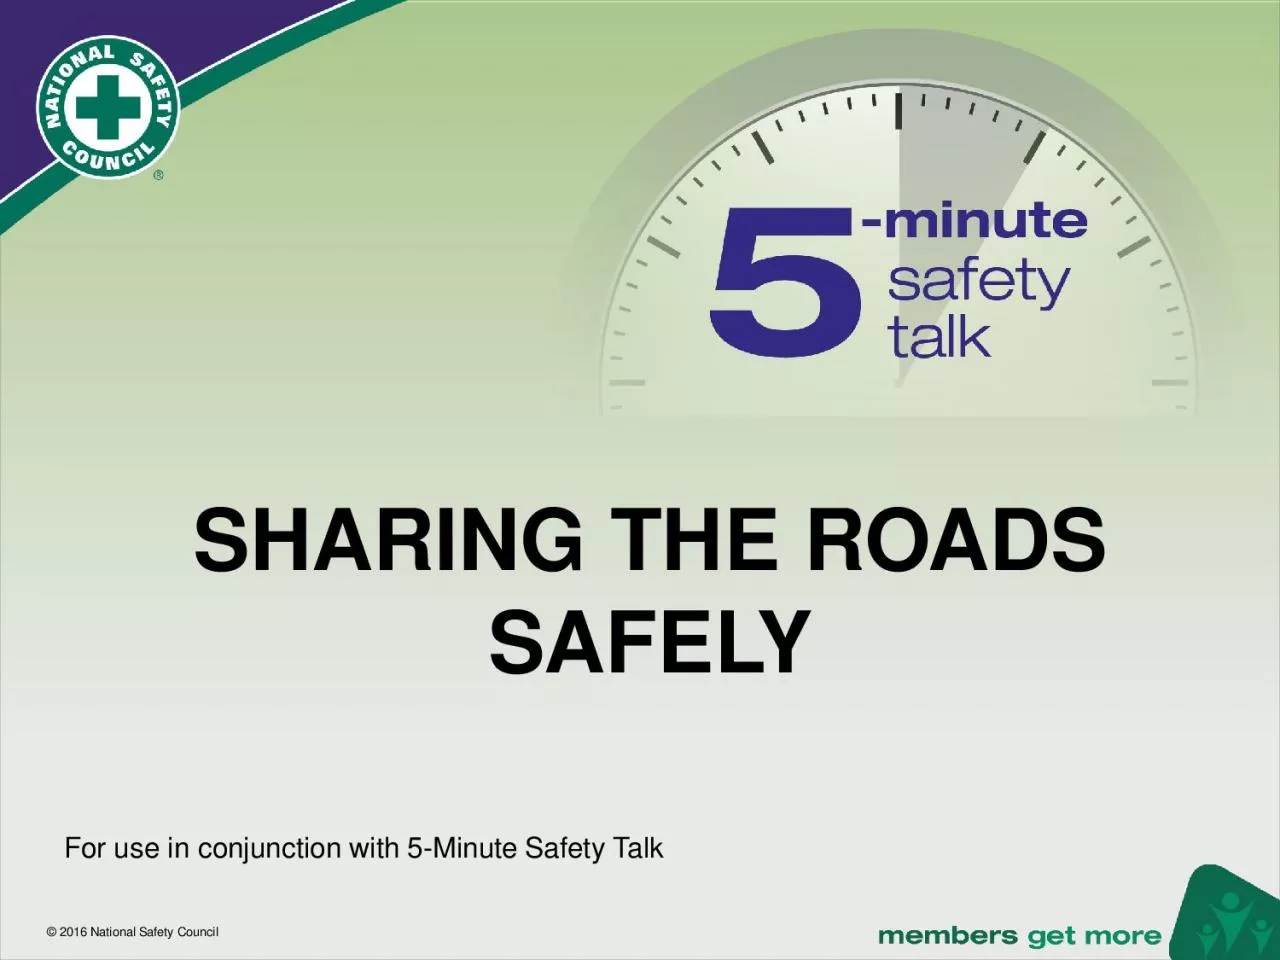 SHARING THE ROADS SAFELY